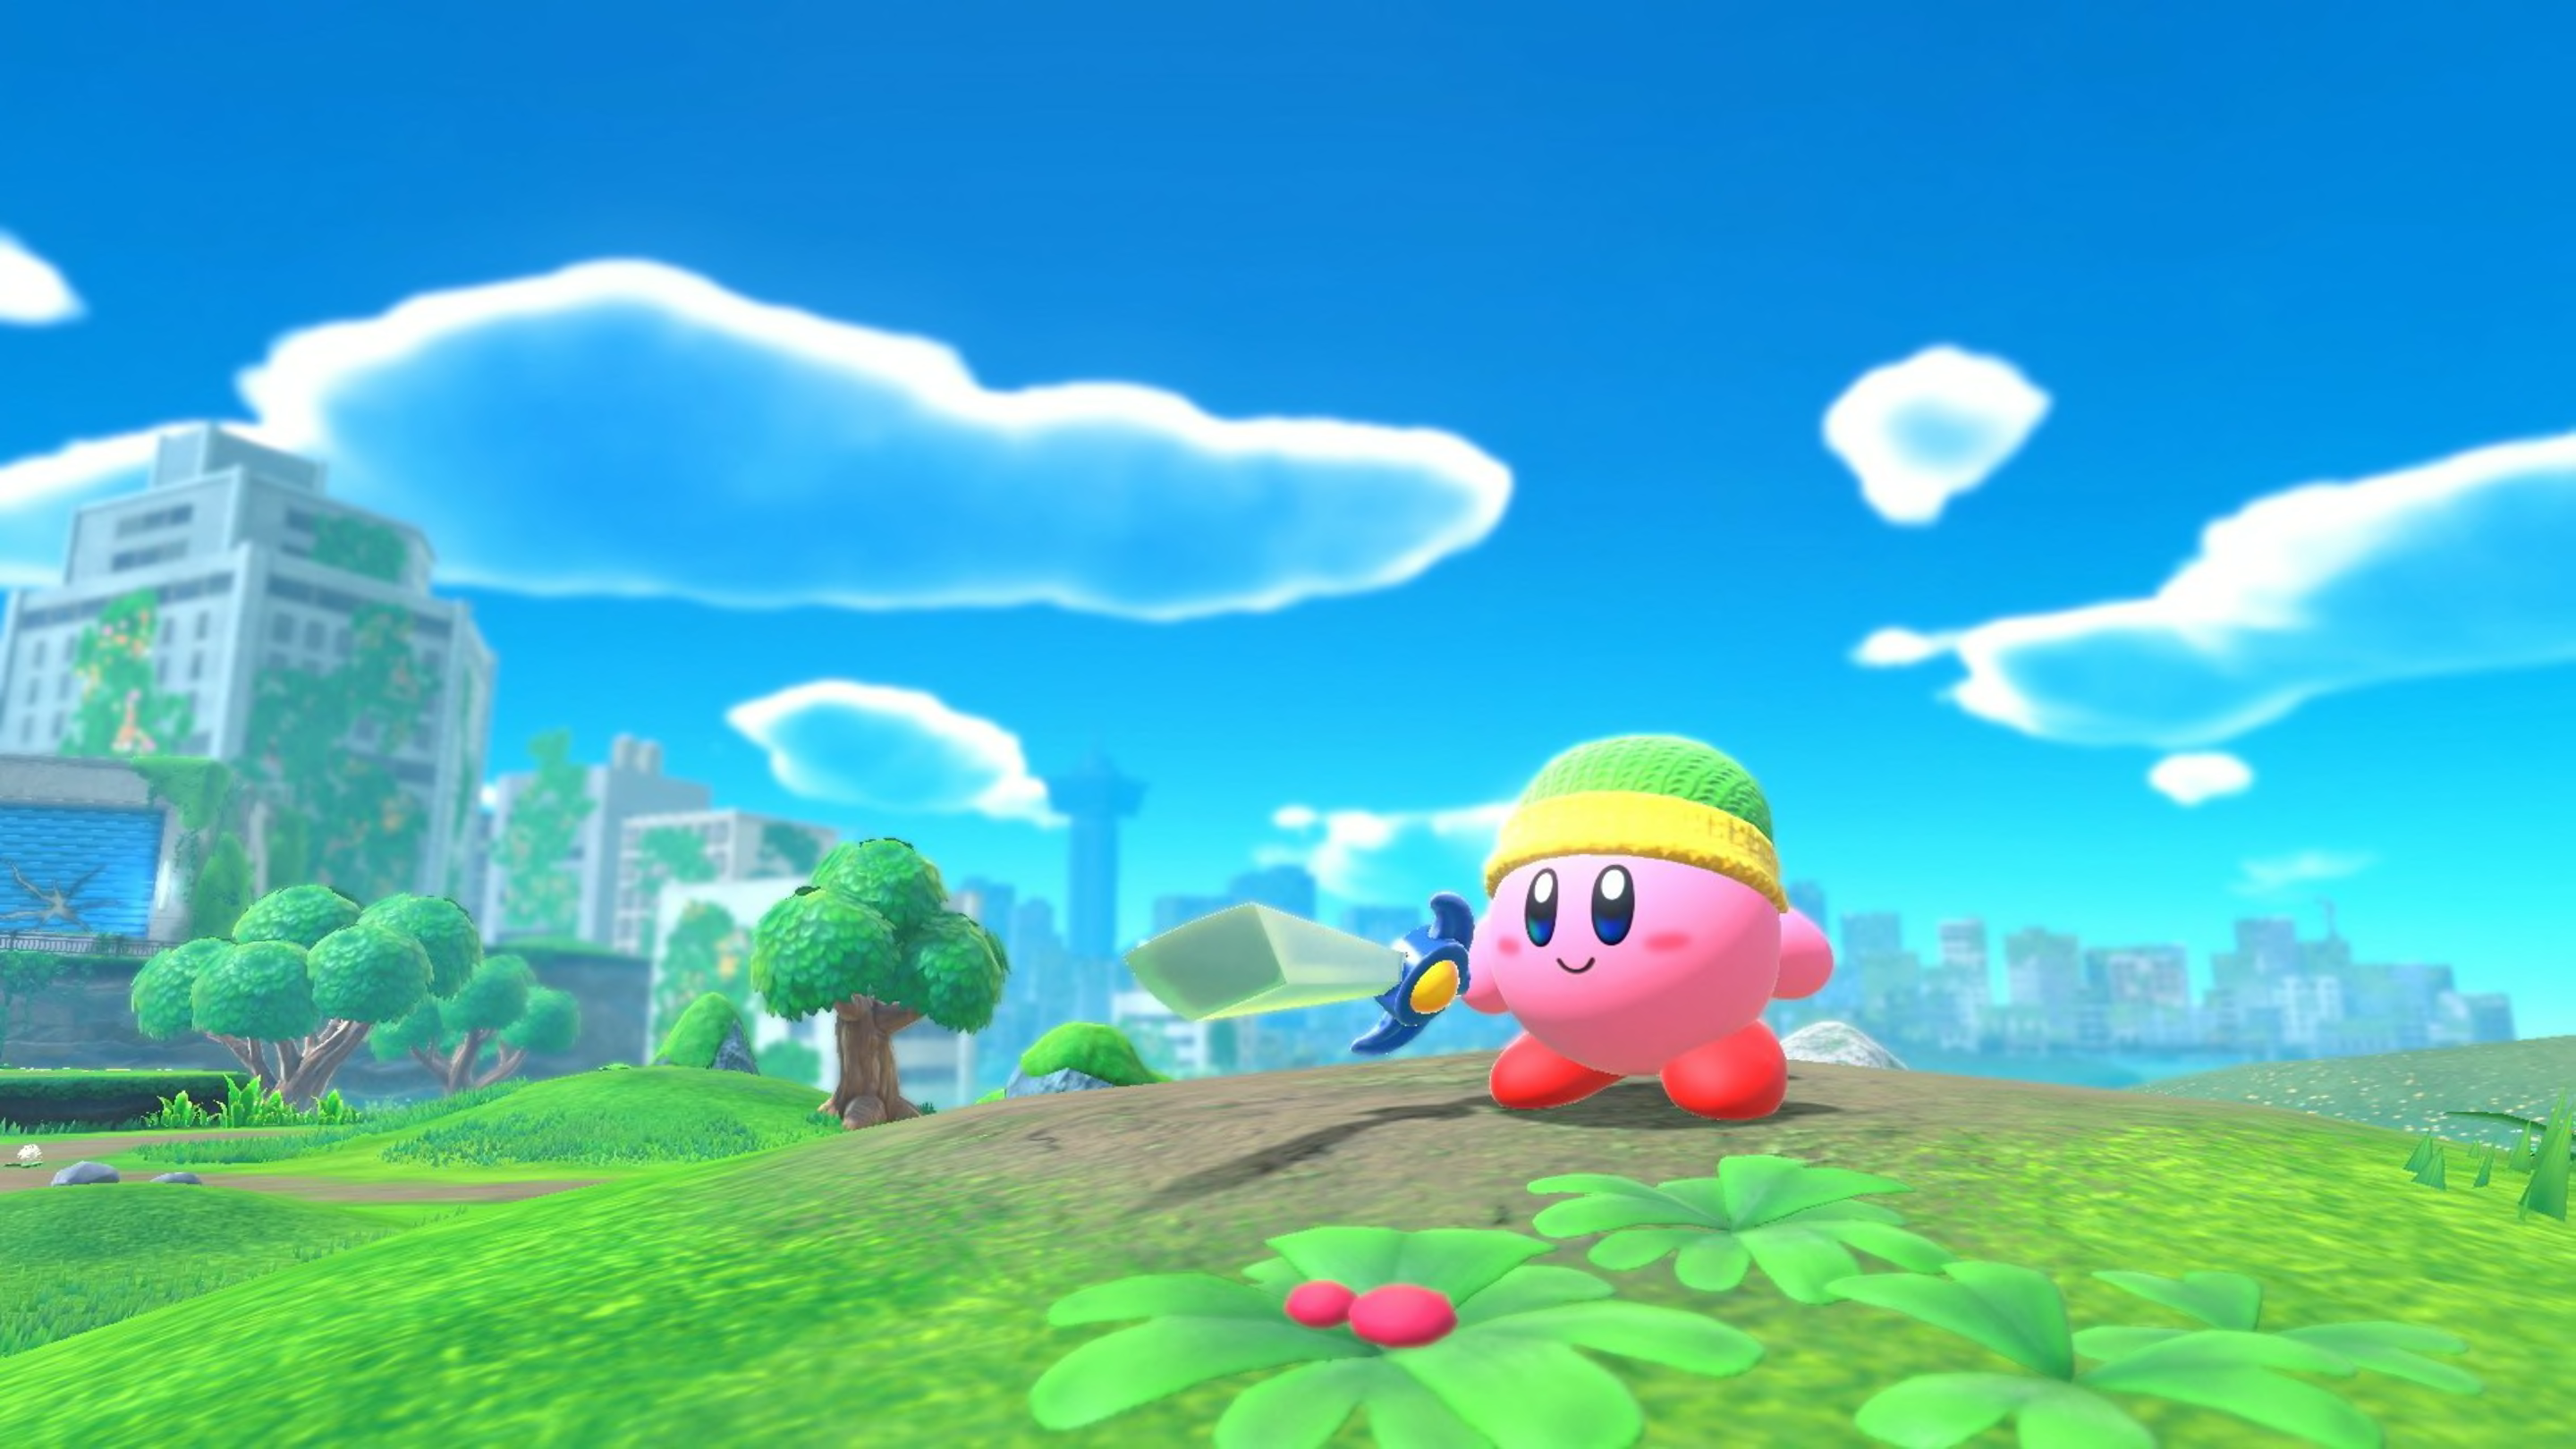 Kirby And The Forgotten Land' Review: A Masterclass In Game Design